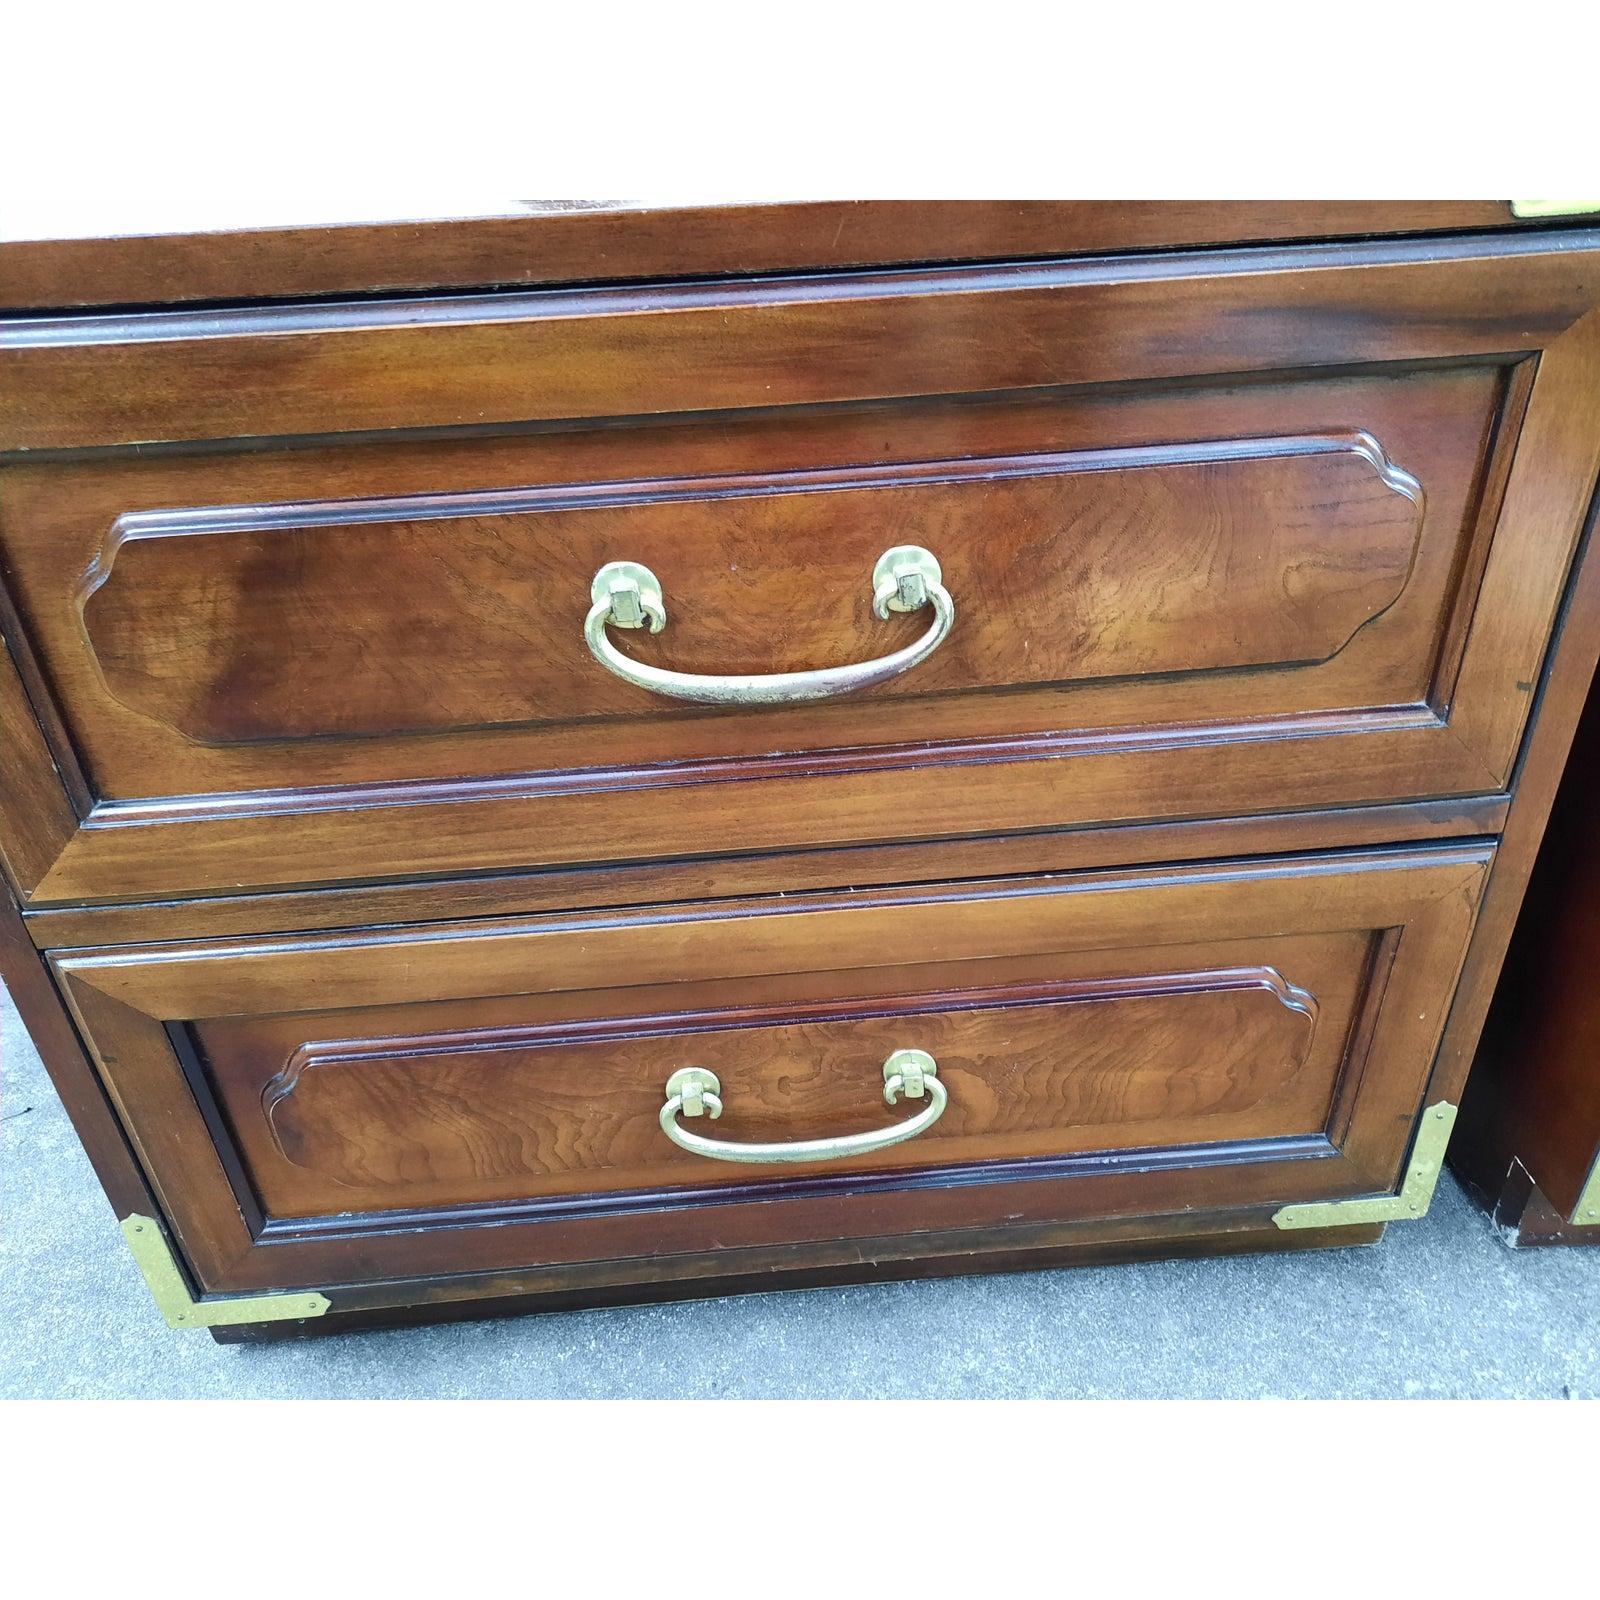 Anglo-Japanese Bernhardt Asian American Campaign Mahogany Burl Nightstands, a Pair For Sale